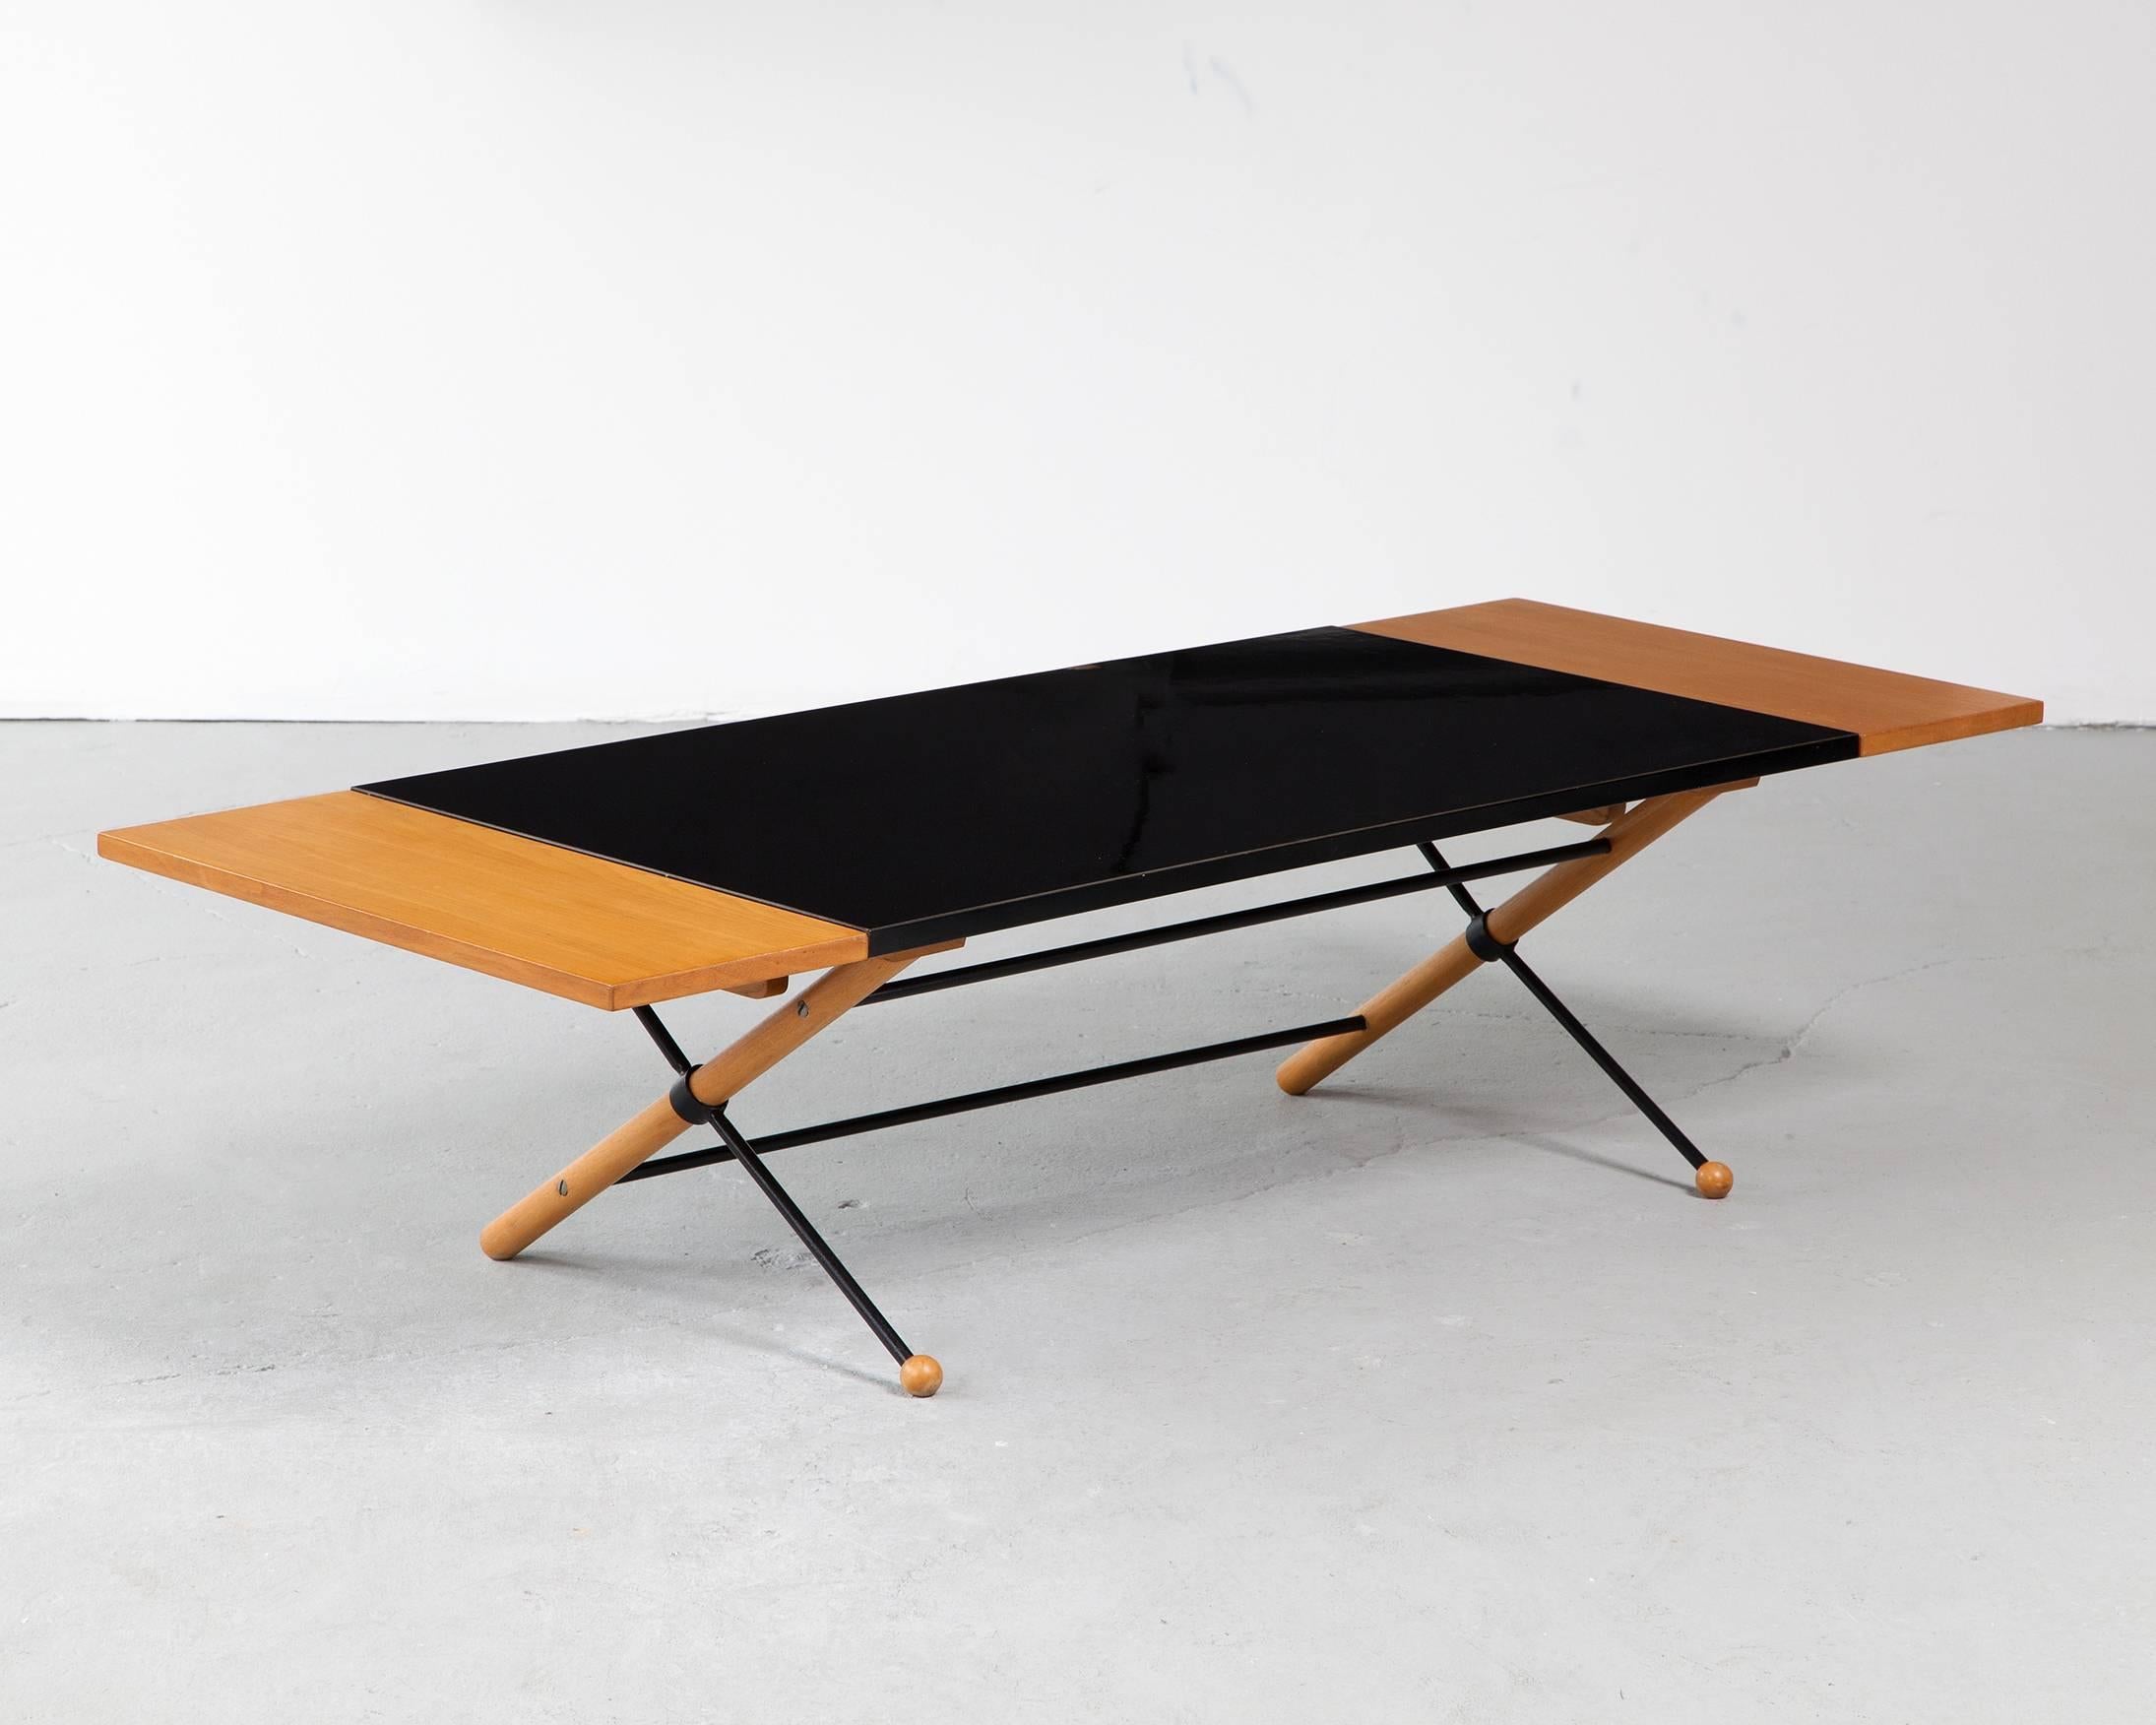 American Coffee Table by Greta Magnusson Grossman, USA, 1952 For Sale